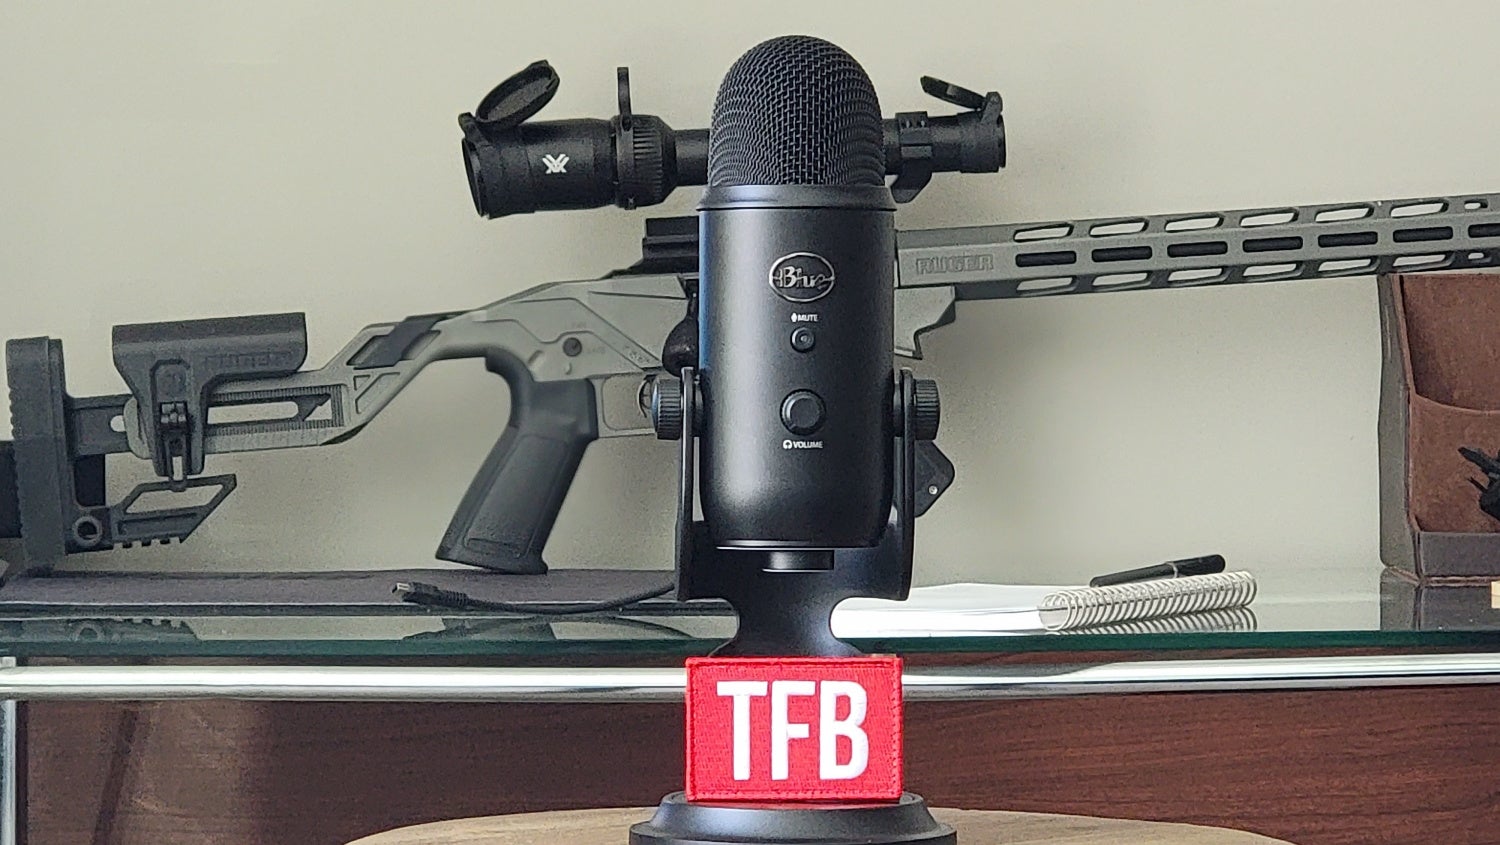 TFB Podcast Roundup 48: Podcasts For Your Dad